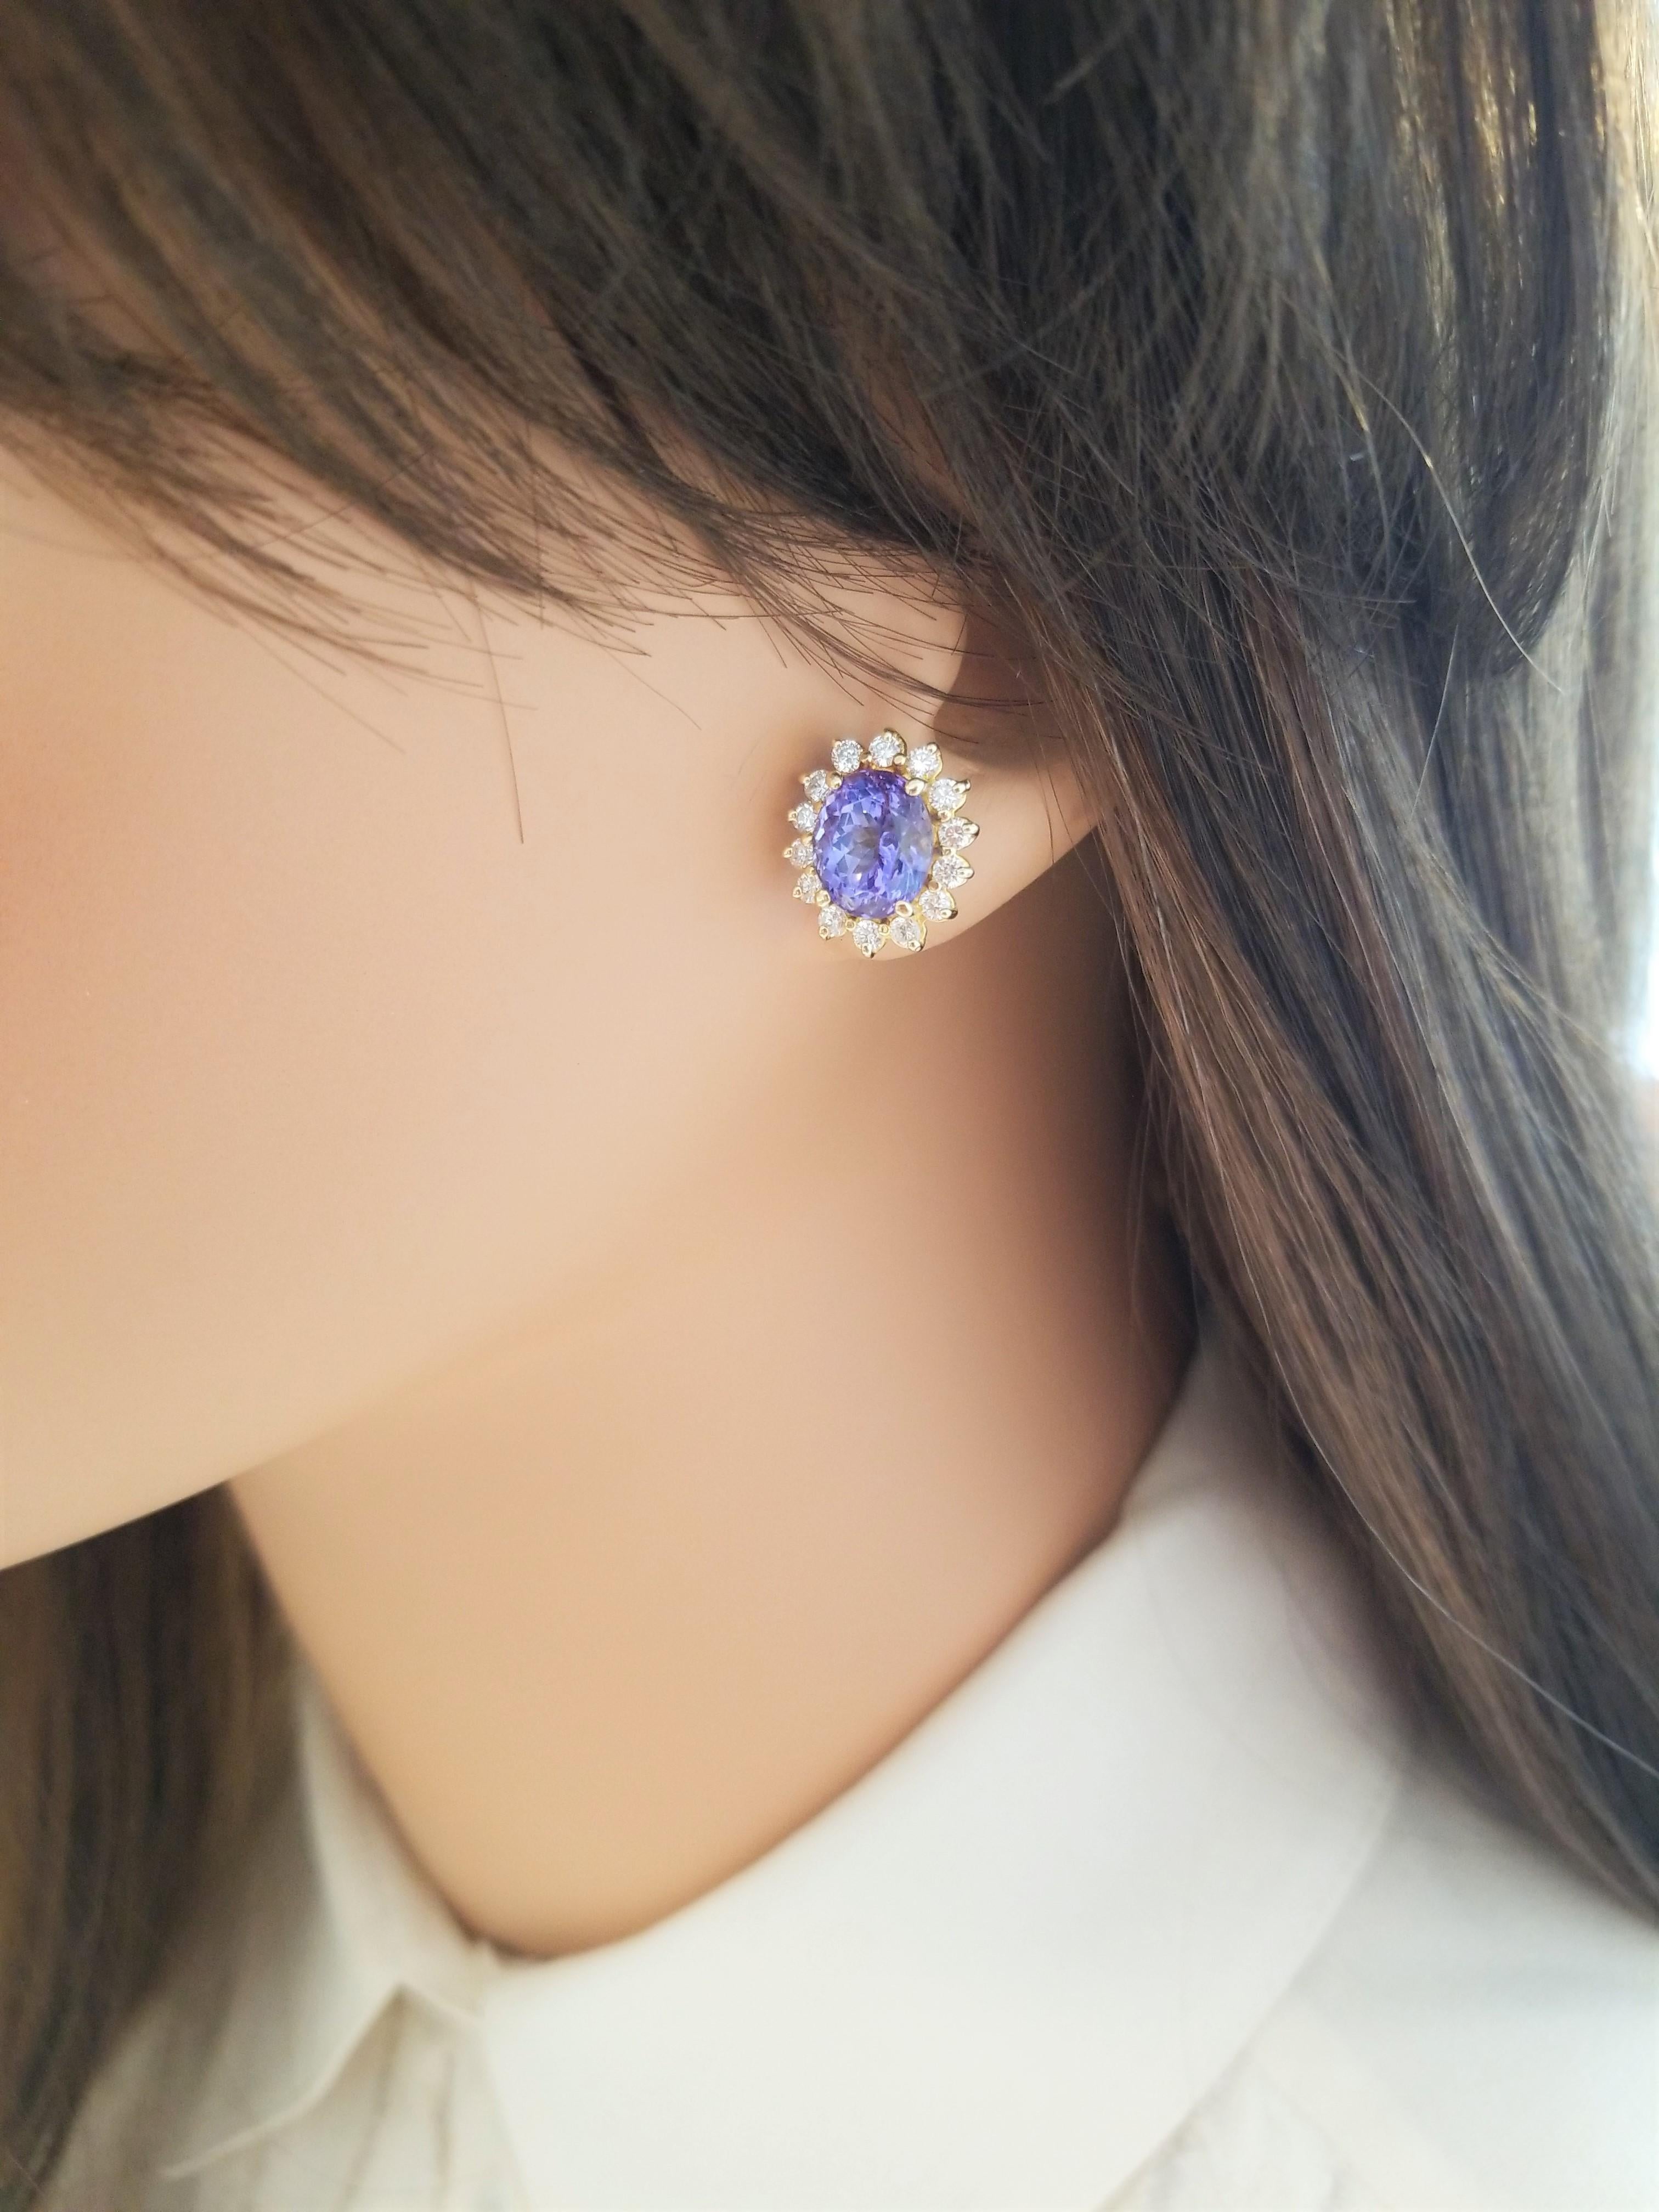 Add a flash of vivid purplish-blue to any ensemble with these spectacular and sparkling tanzanite and diamond earrings. This pair of earrings features 5.43 carat total of purplish-blue tanzanite, from Tanzania, is framed by 0.85 carat total weight